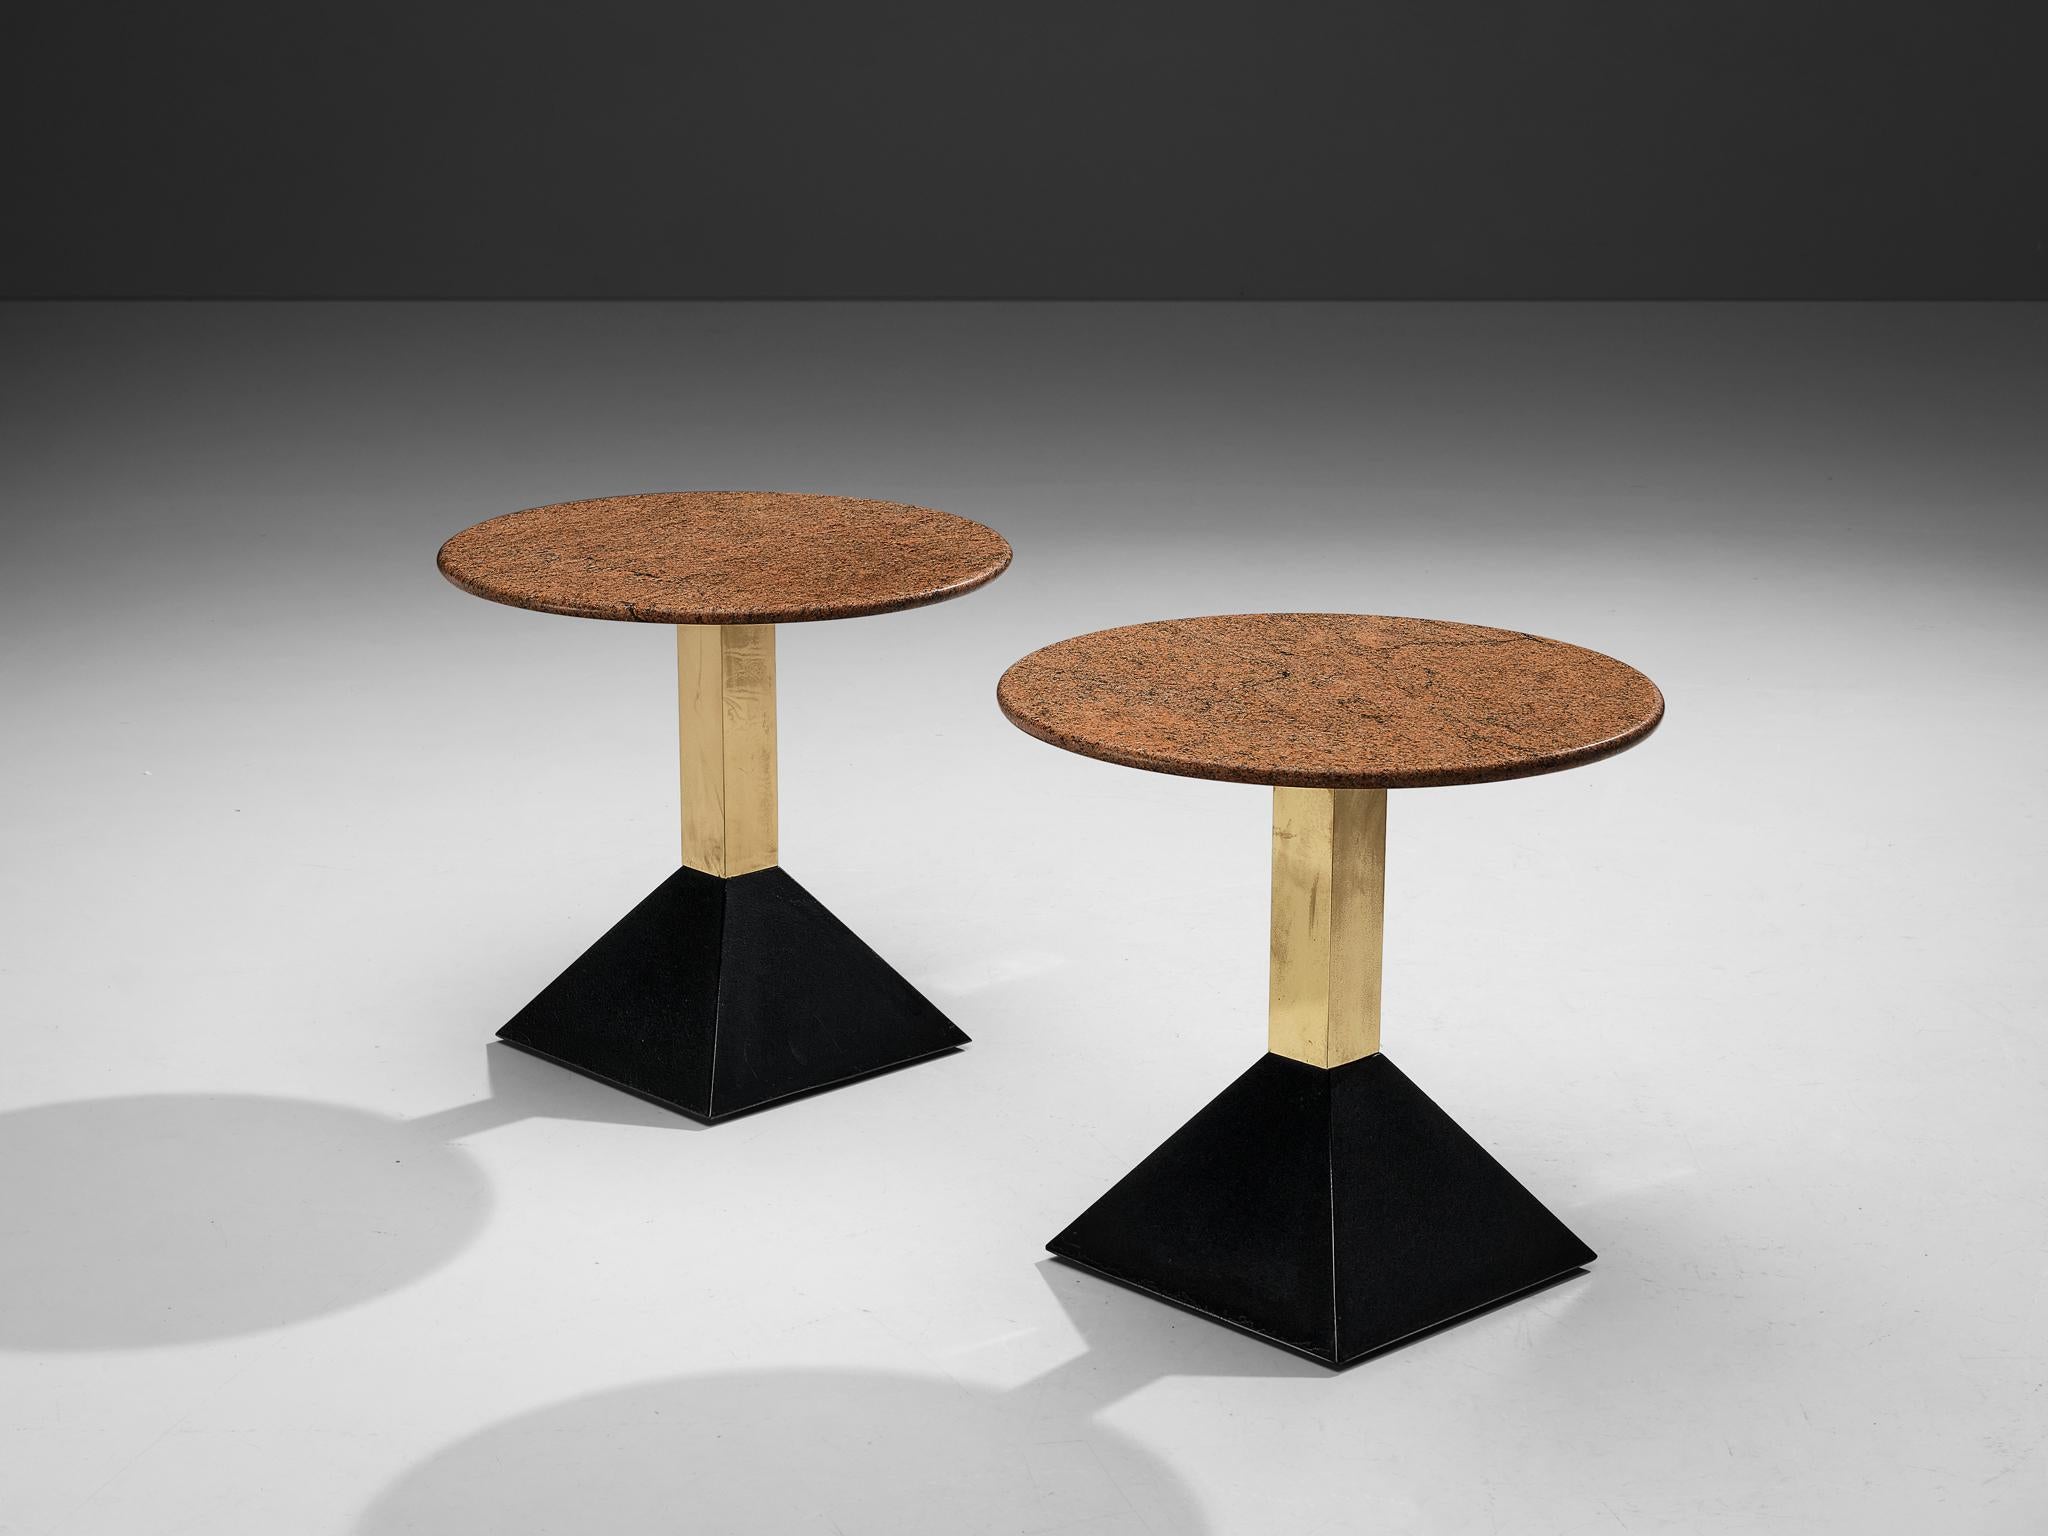 Side tables, granite, metal, brass, Italy, 1980s

These side tables feature a red granite tabletop in round format. The granite shows a vivid surface. A brass pedestal ends in a black trapezoid base in metal. The composition of textures and shapes,